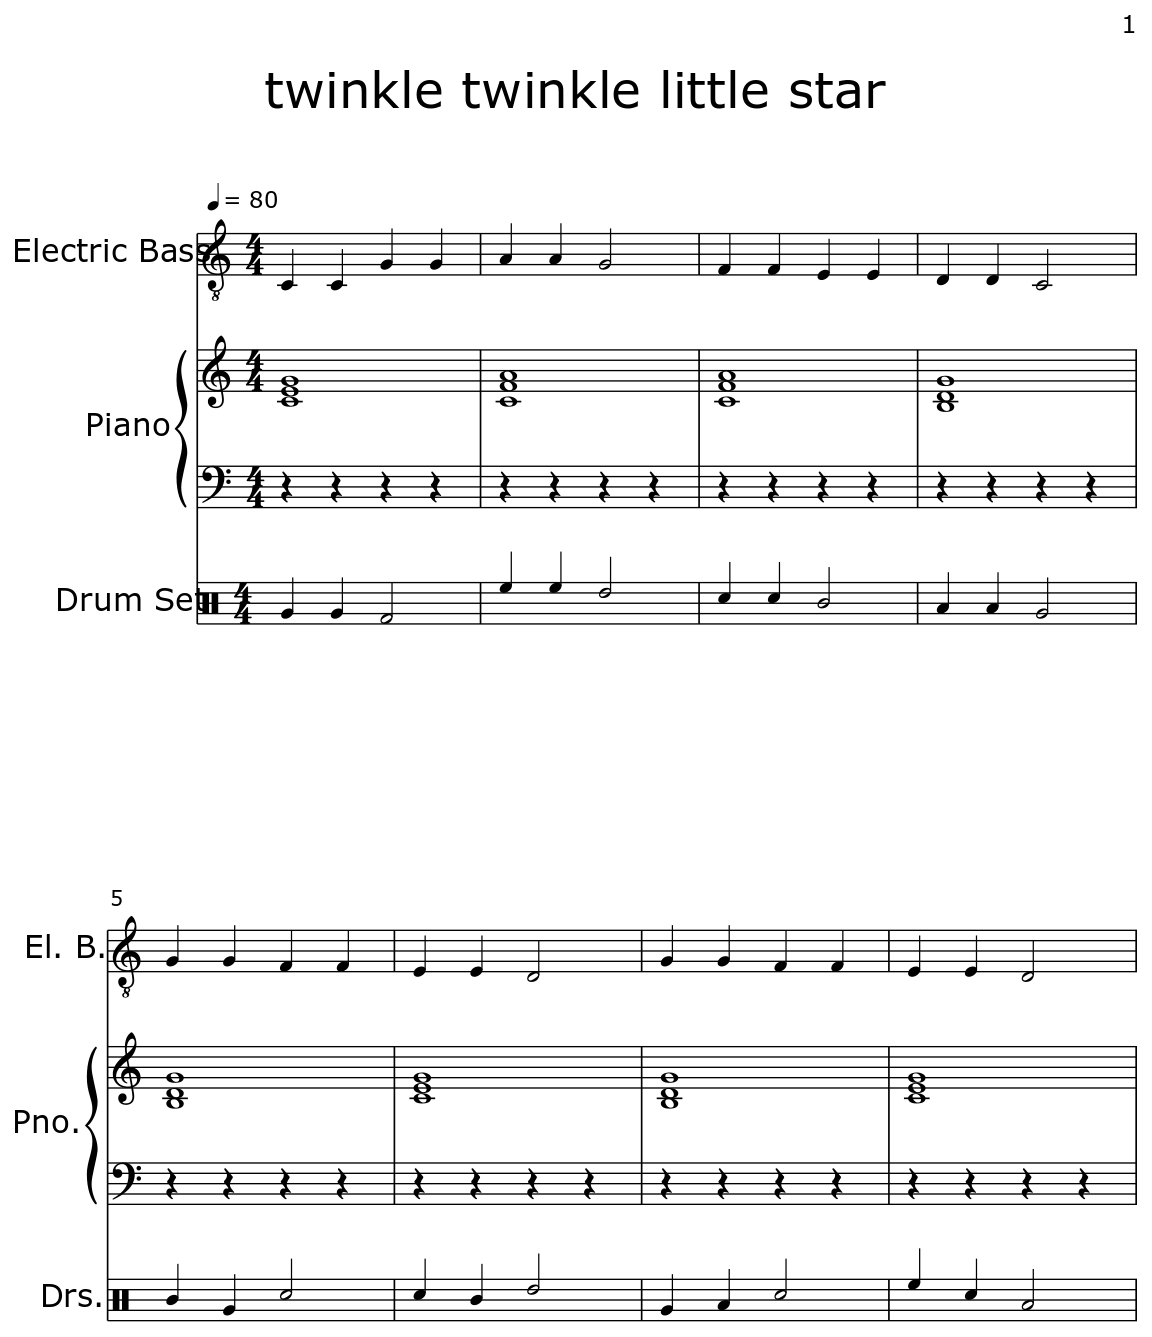 twinkle twinkle little star - Sheet music for Electric Bass, Piano ...